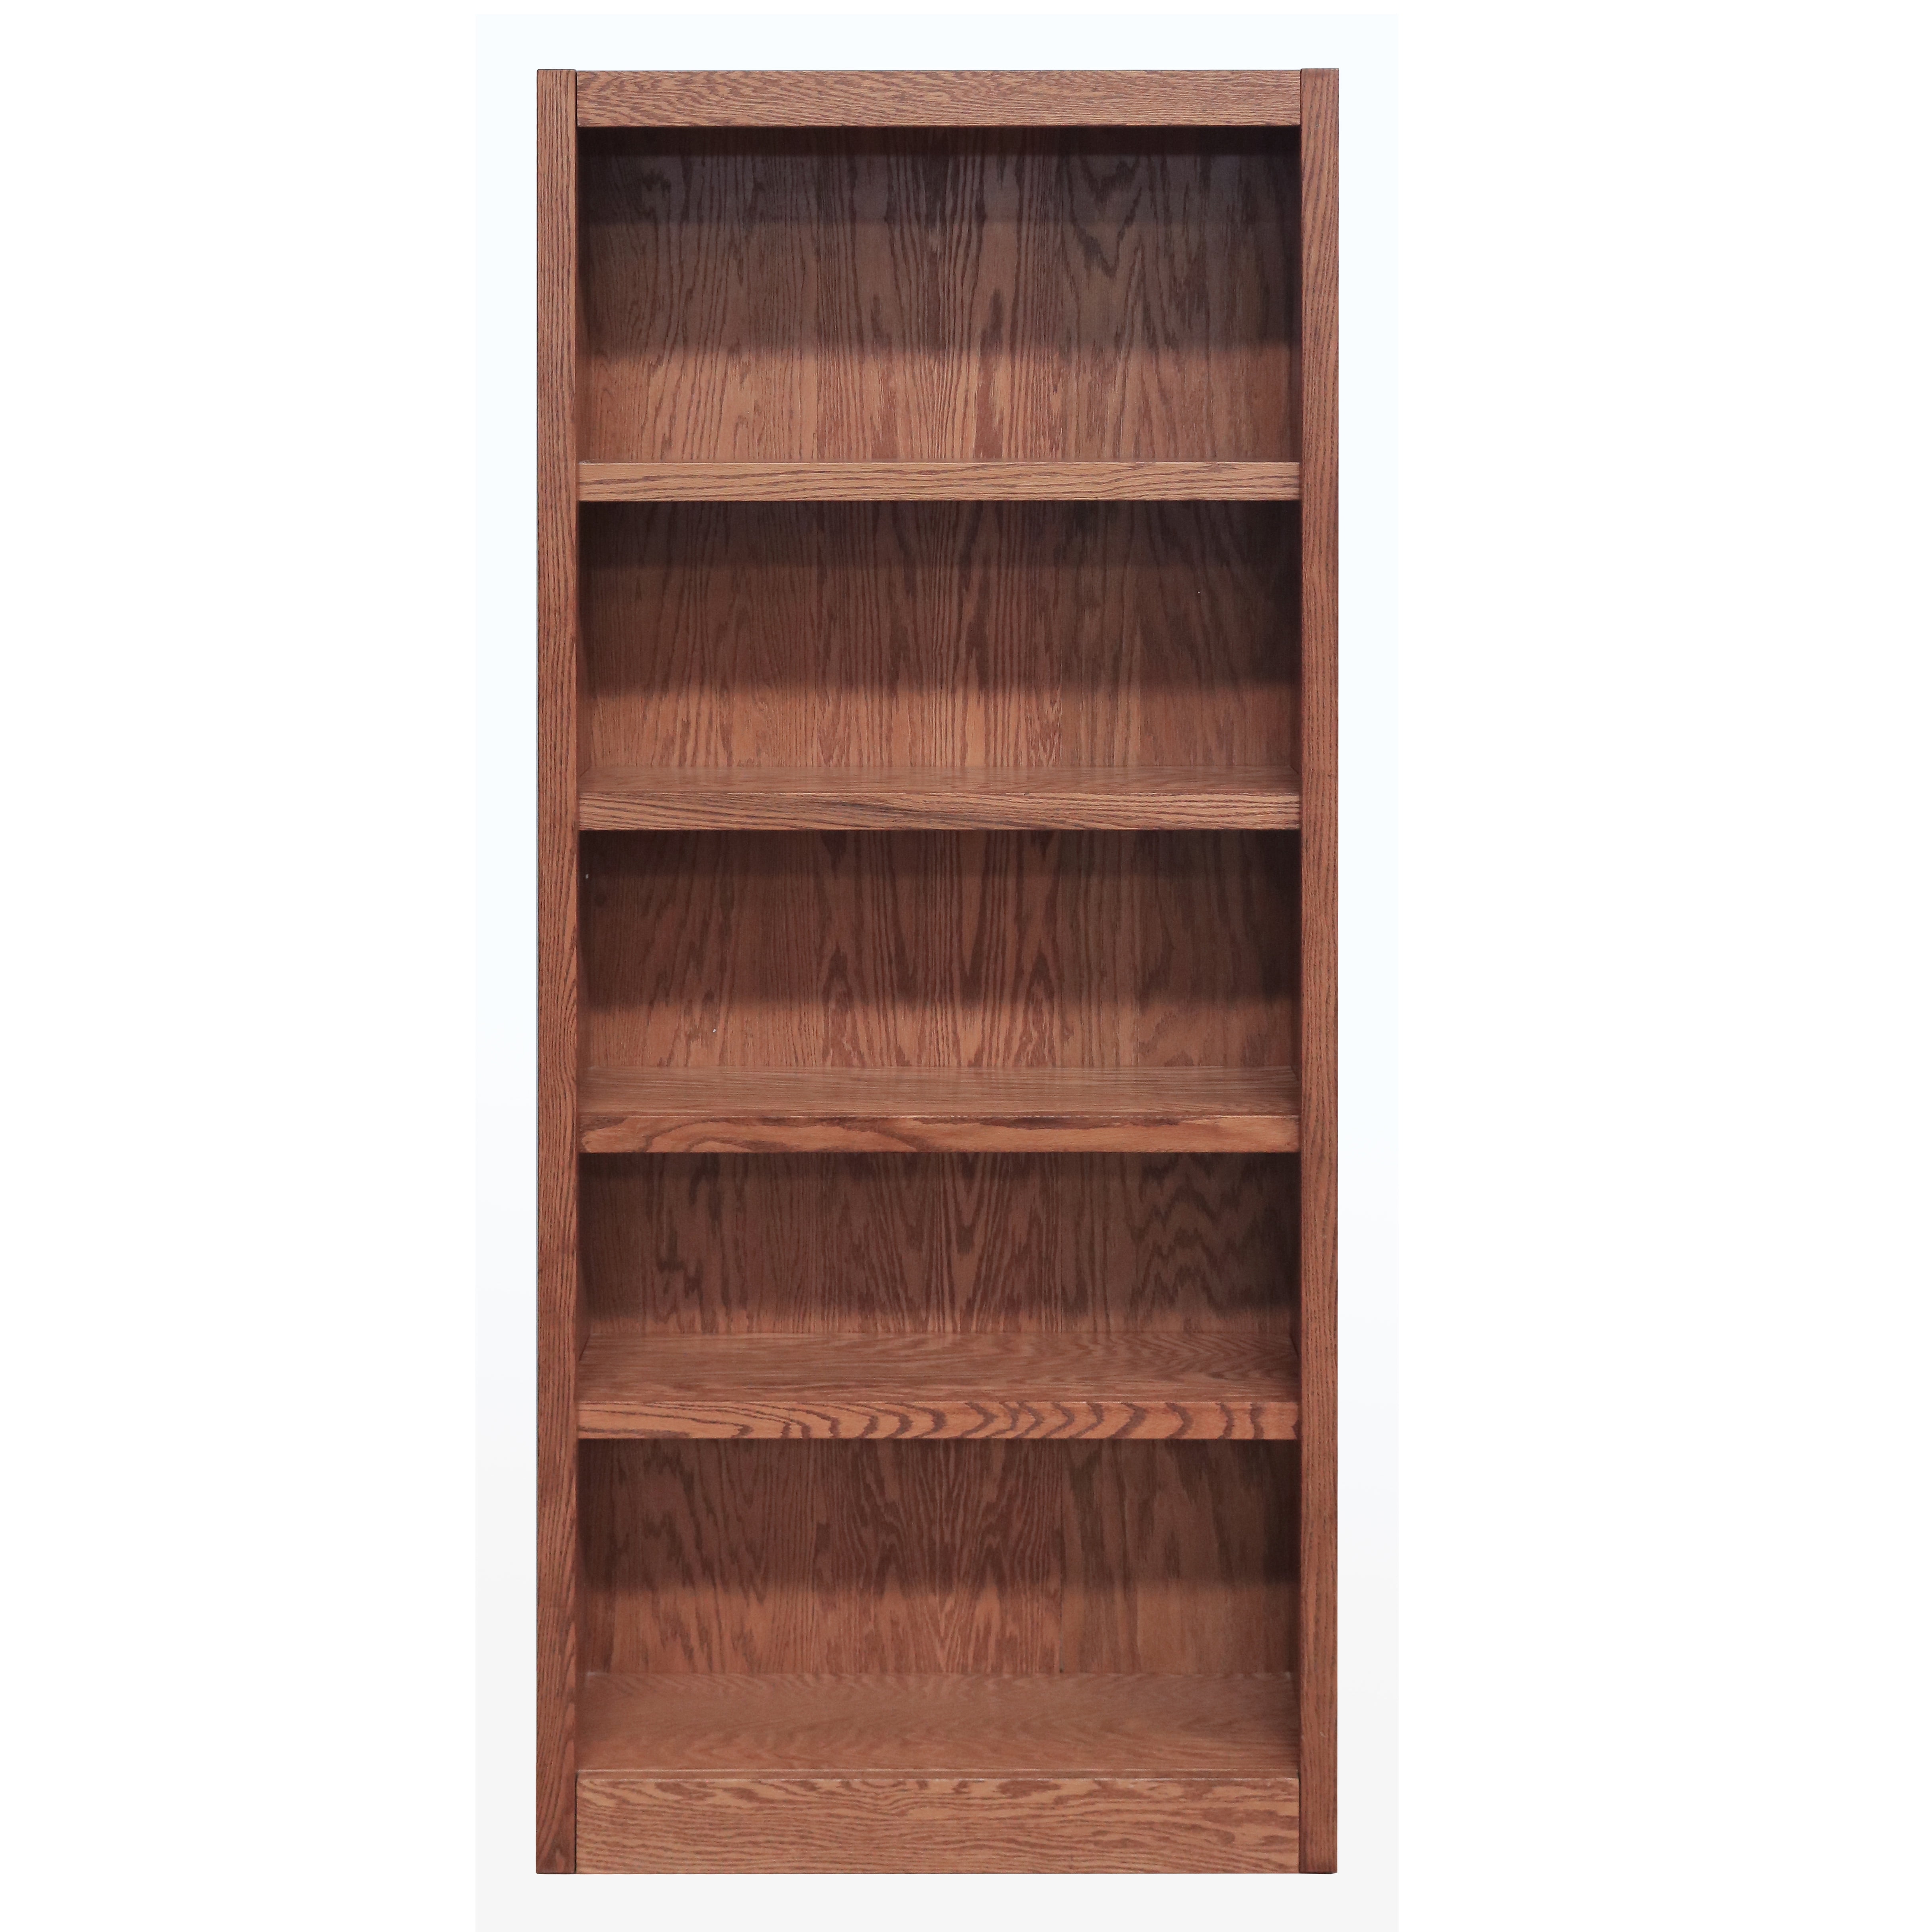 Concepts In Wood 5 Shelf Bookcase, Tall Oak Bookcase With Adjustable Shelves